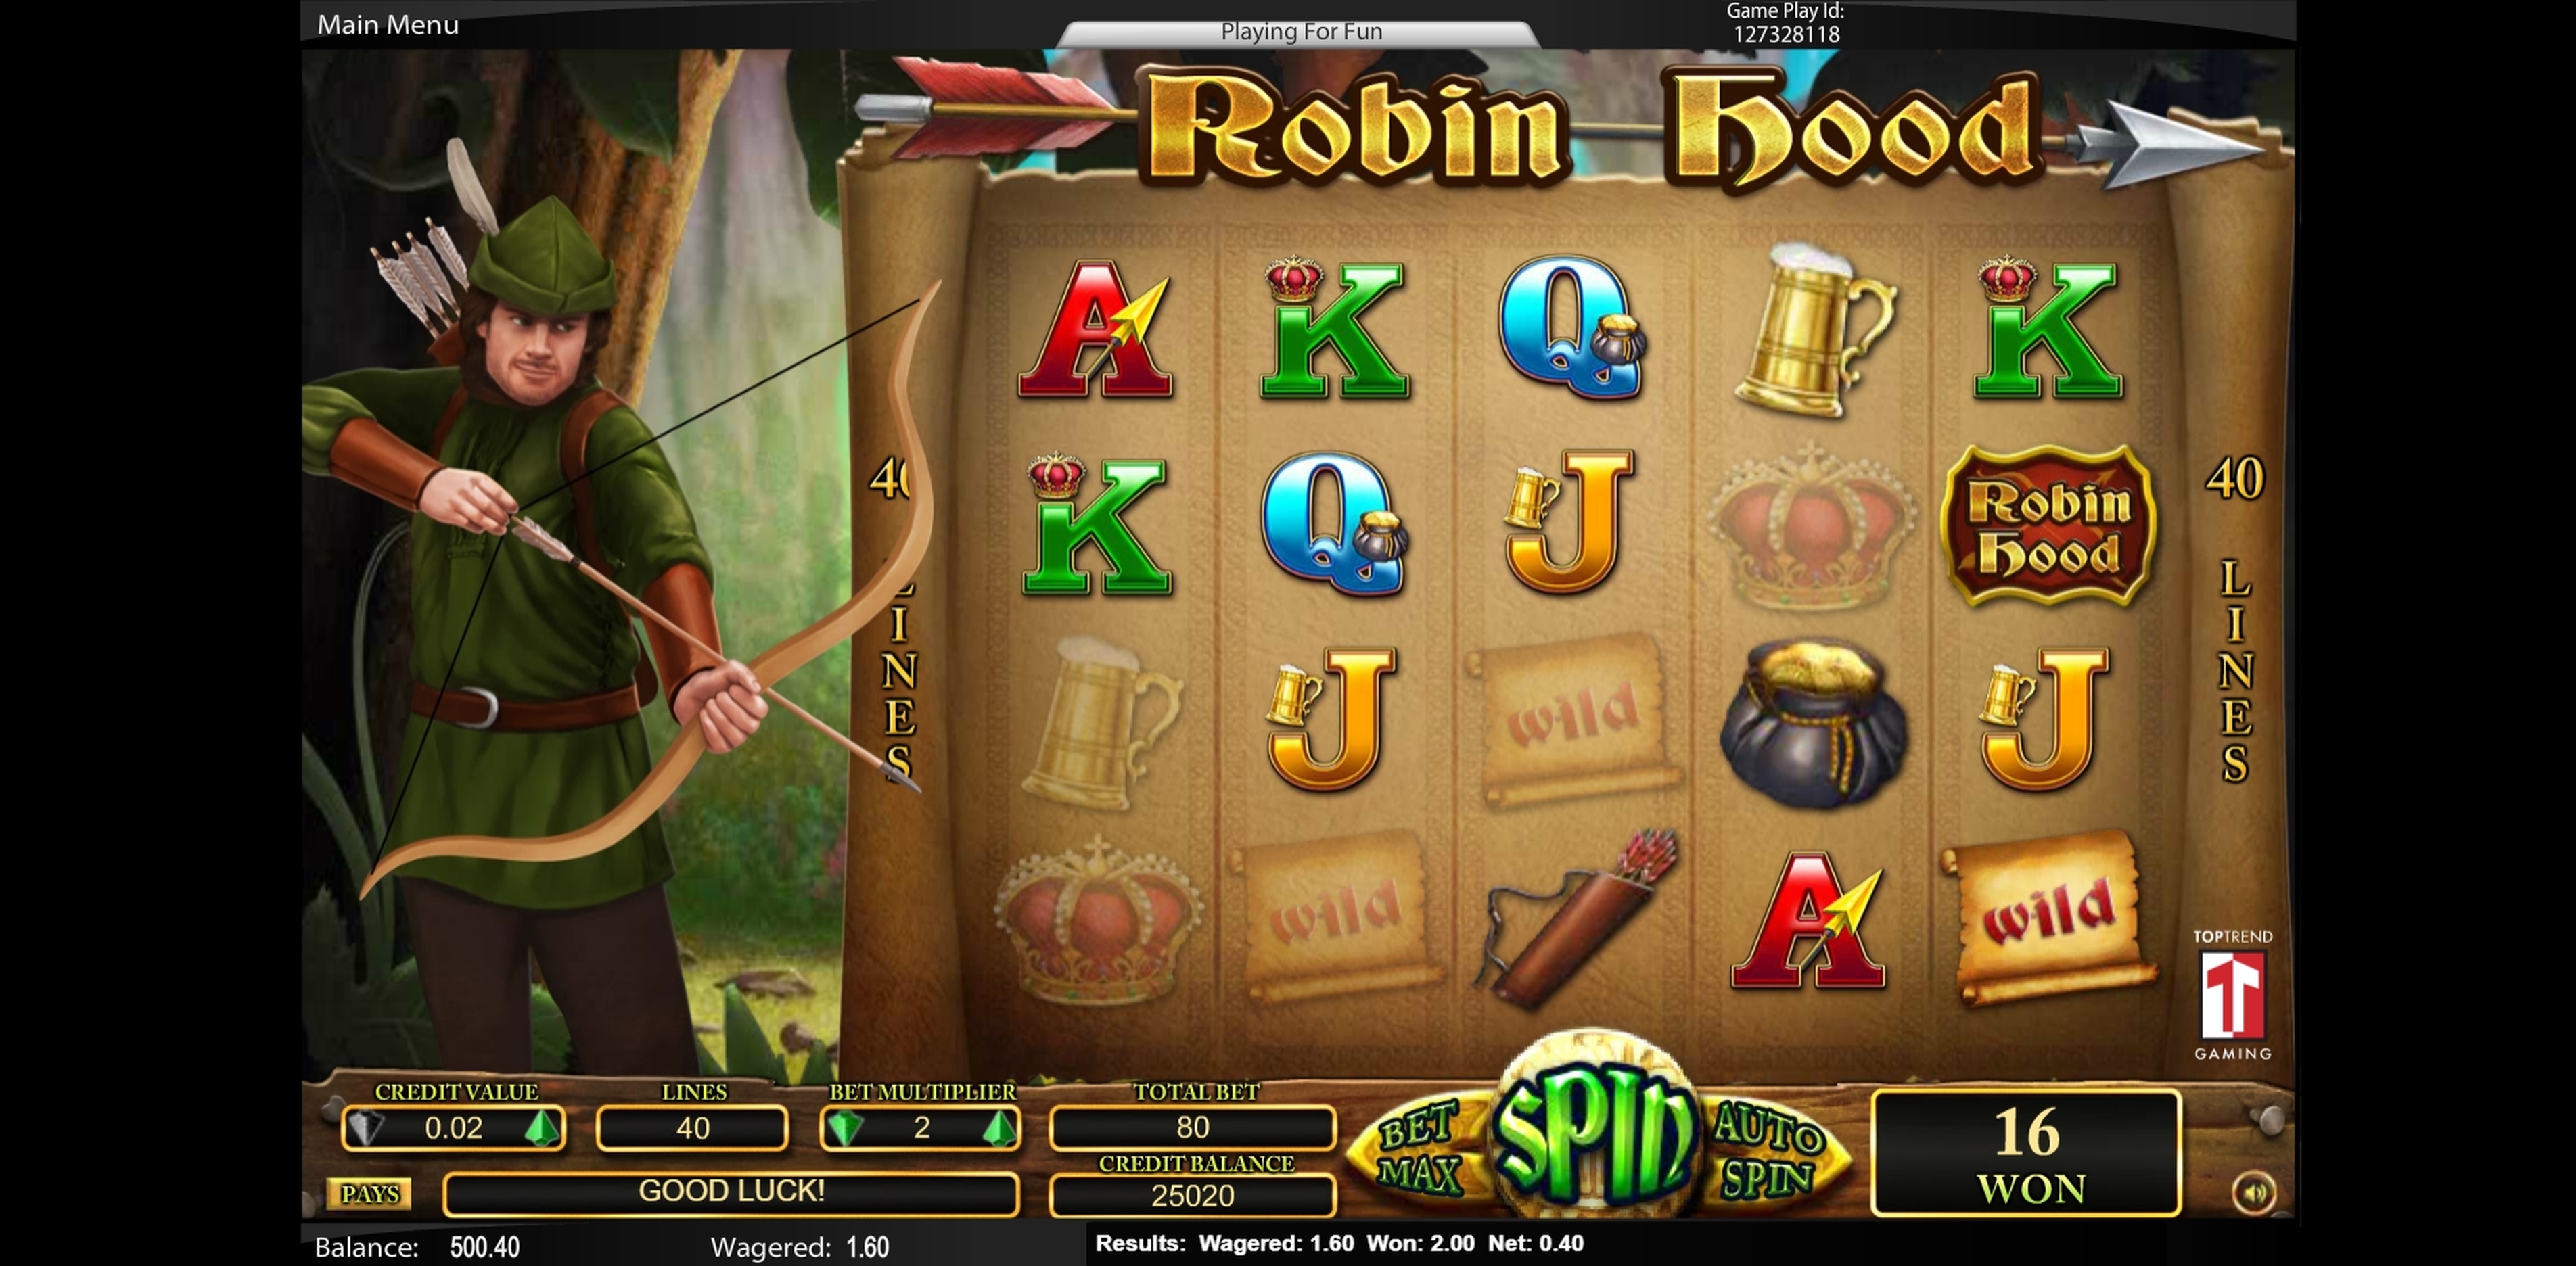 Win Money in Robin Hood Free Slot Game by Top Trend Gaming